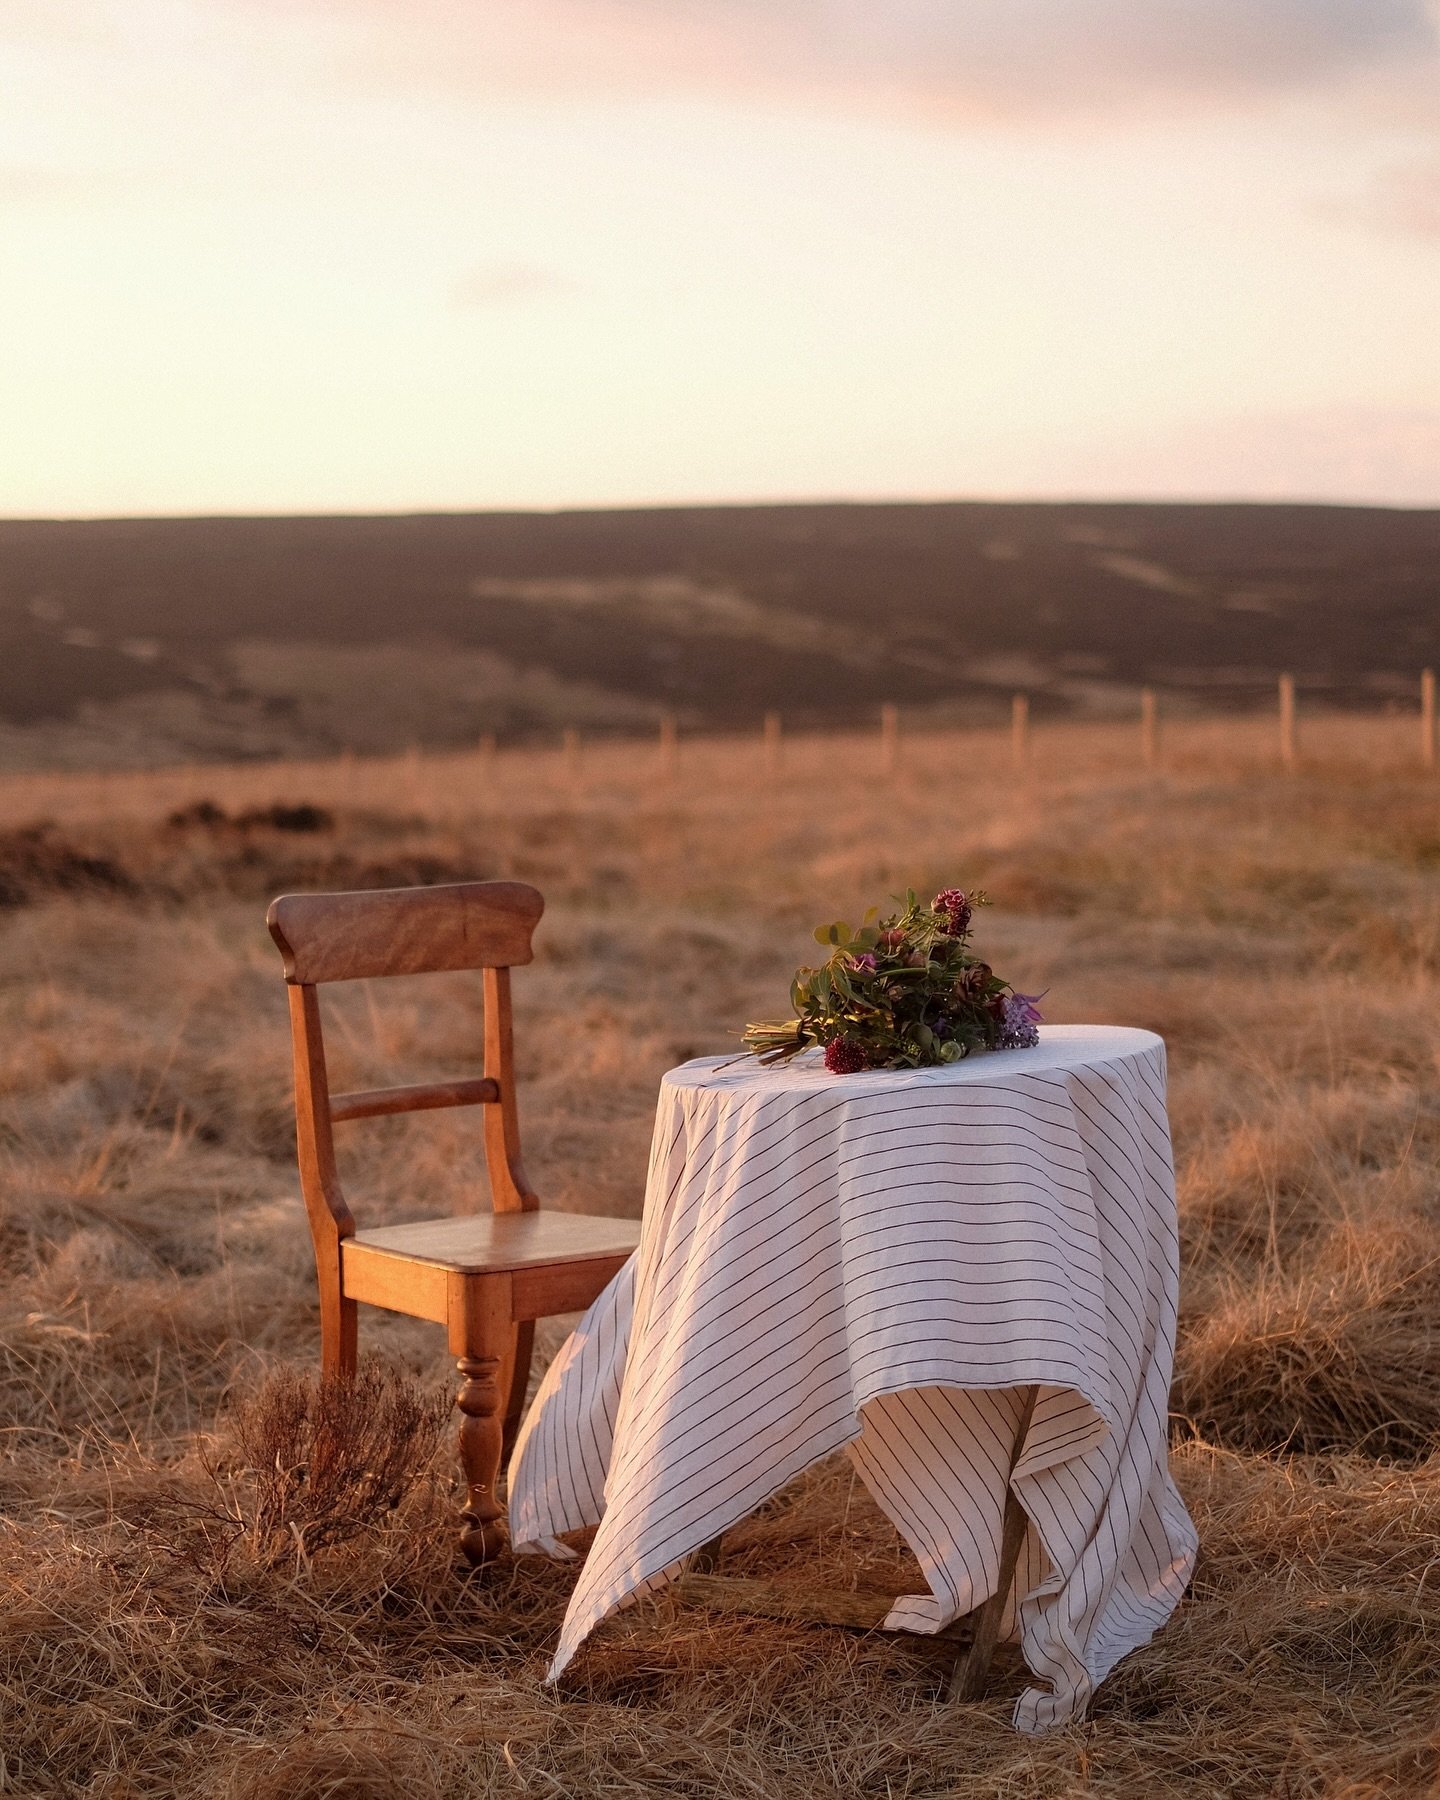 The perfect spot for a golden hour glass of wine, up on the moors. From a fun shoot with @our.kindred a couple of years ago, prancing around on the muddy moors with linen tablecloths, bouquets of flowers and floaty dresses.

#springintospring #spring